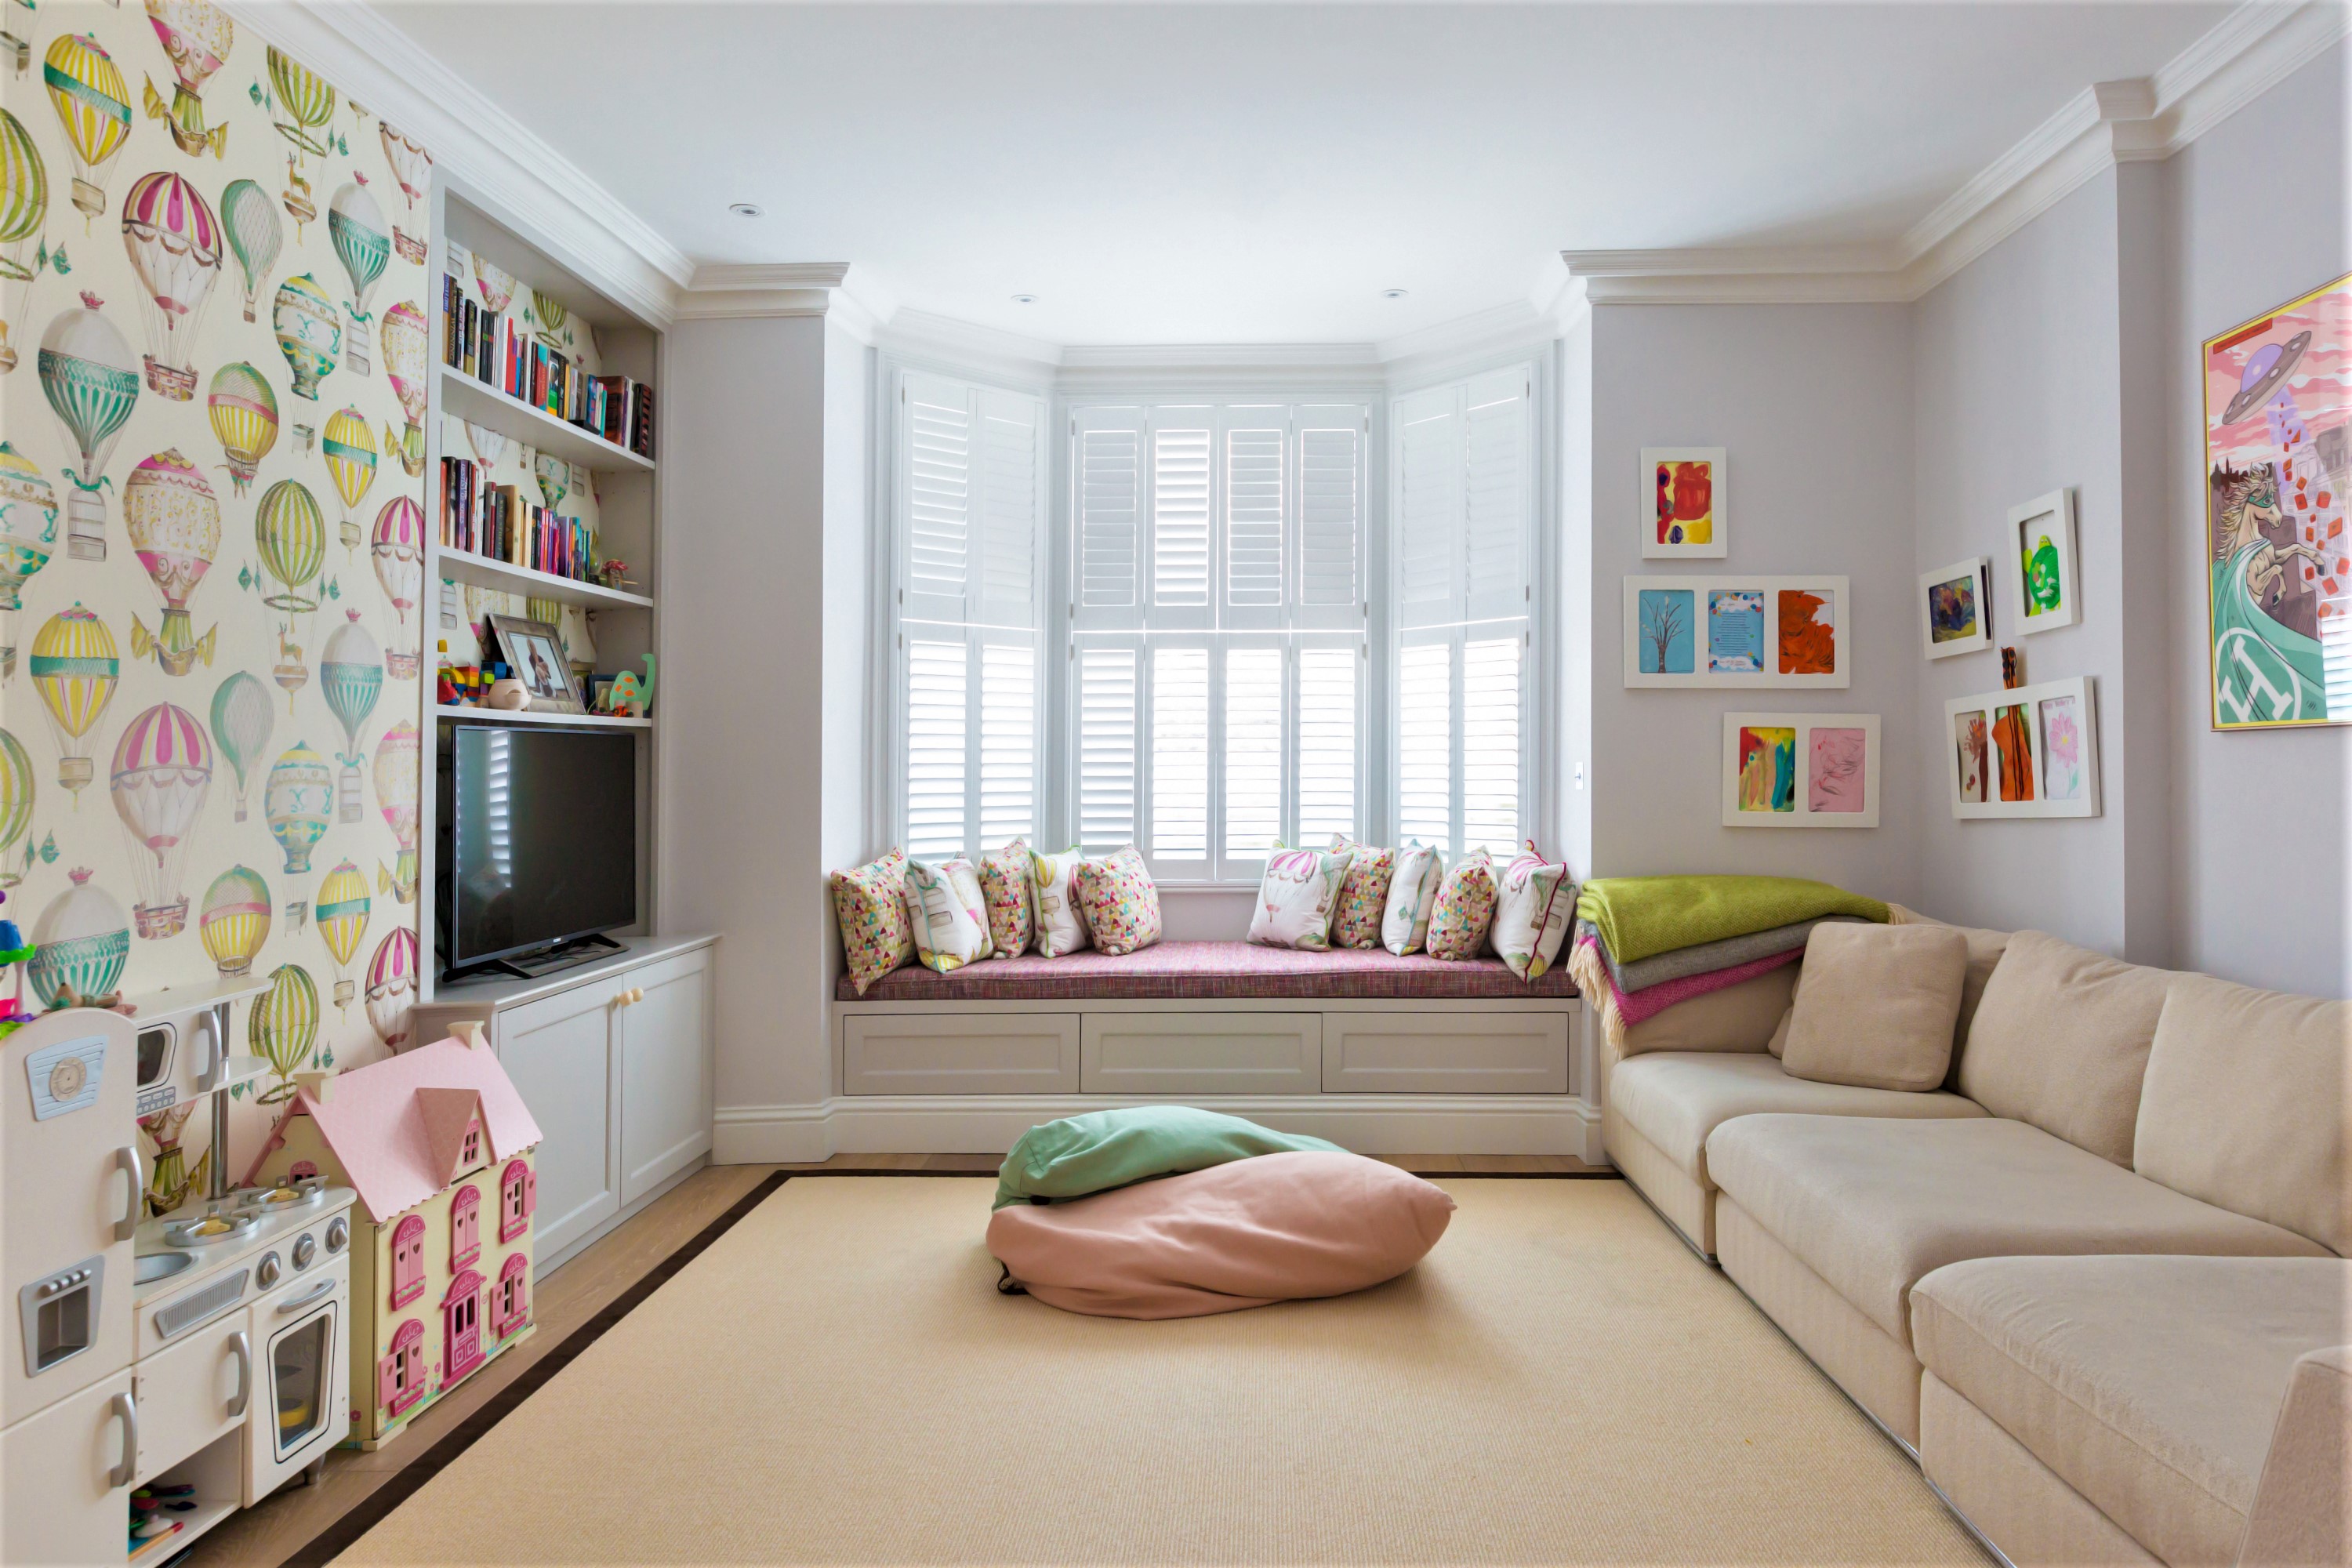 The children's playroom has practical storage, plantation shutters and whimsical wallpaper